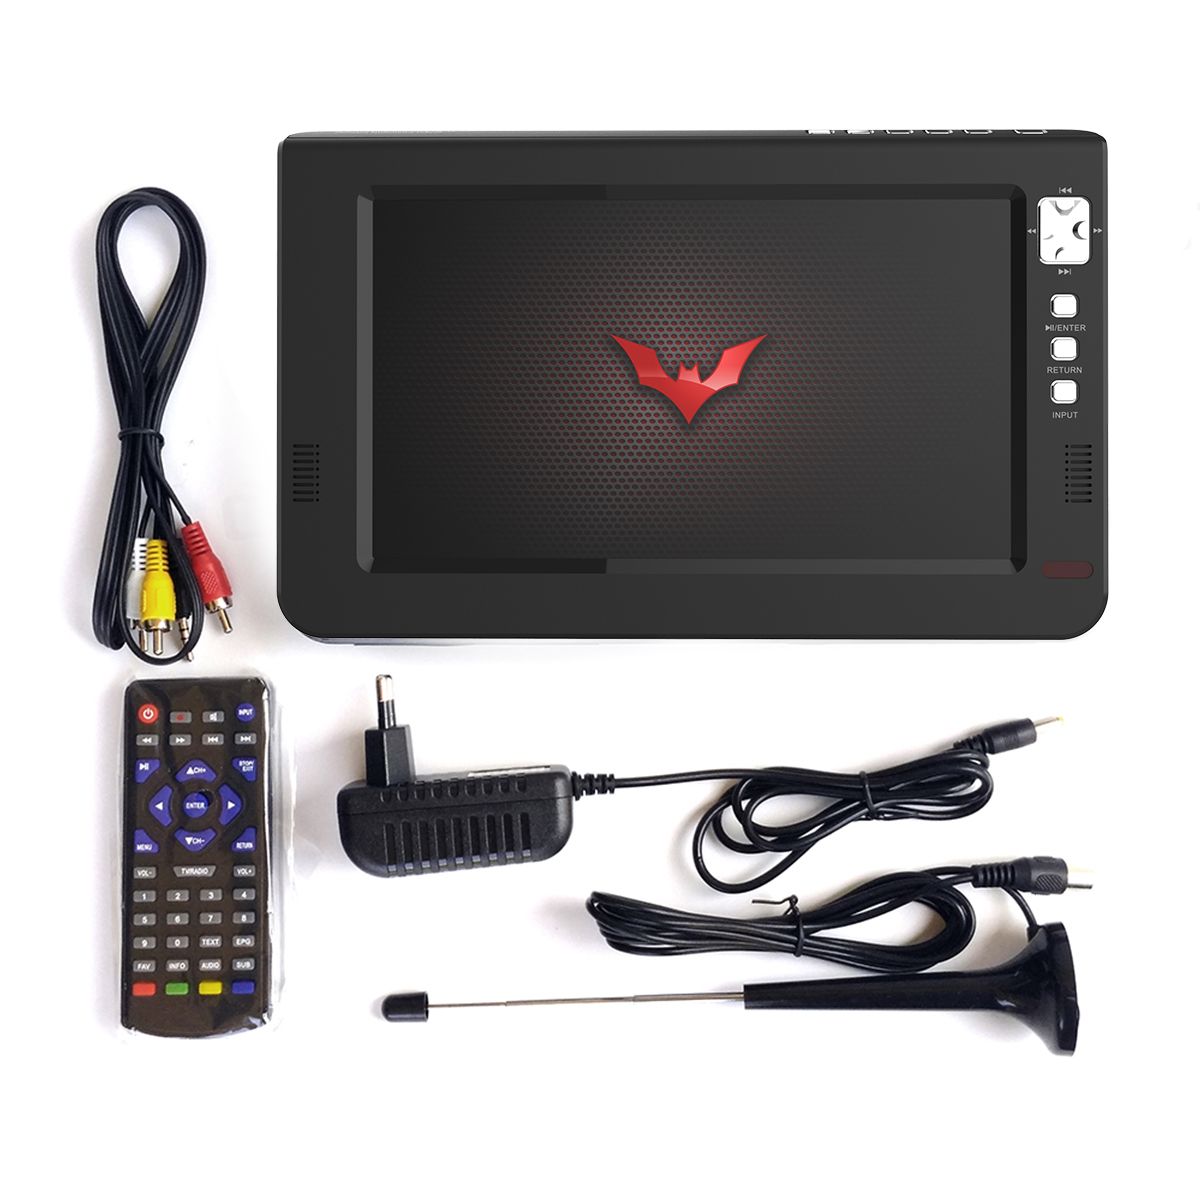 EASINY-1001D-9-Inch-DVB-T2-1080P-HD-Analog-DTV-ATV-Portable-TV-Television-Support-TF-Card-USB-PVR-1646312